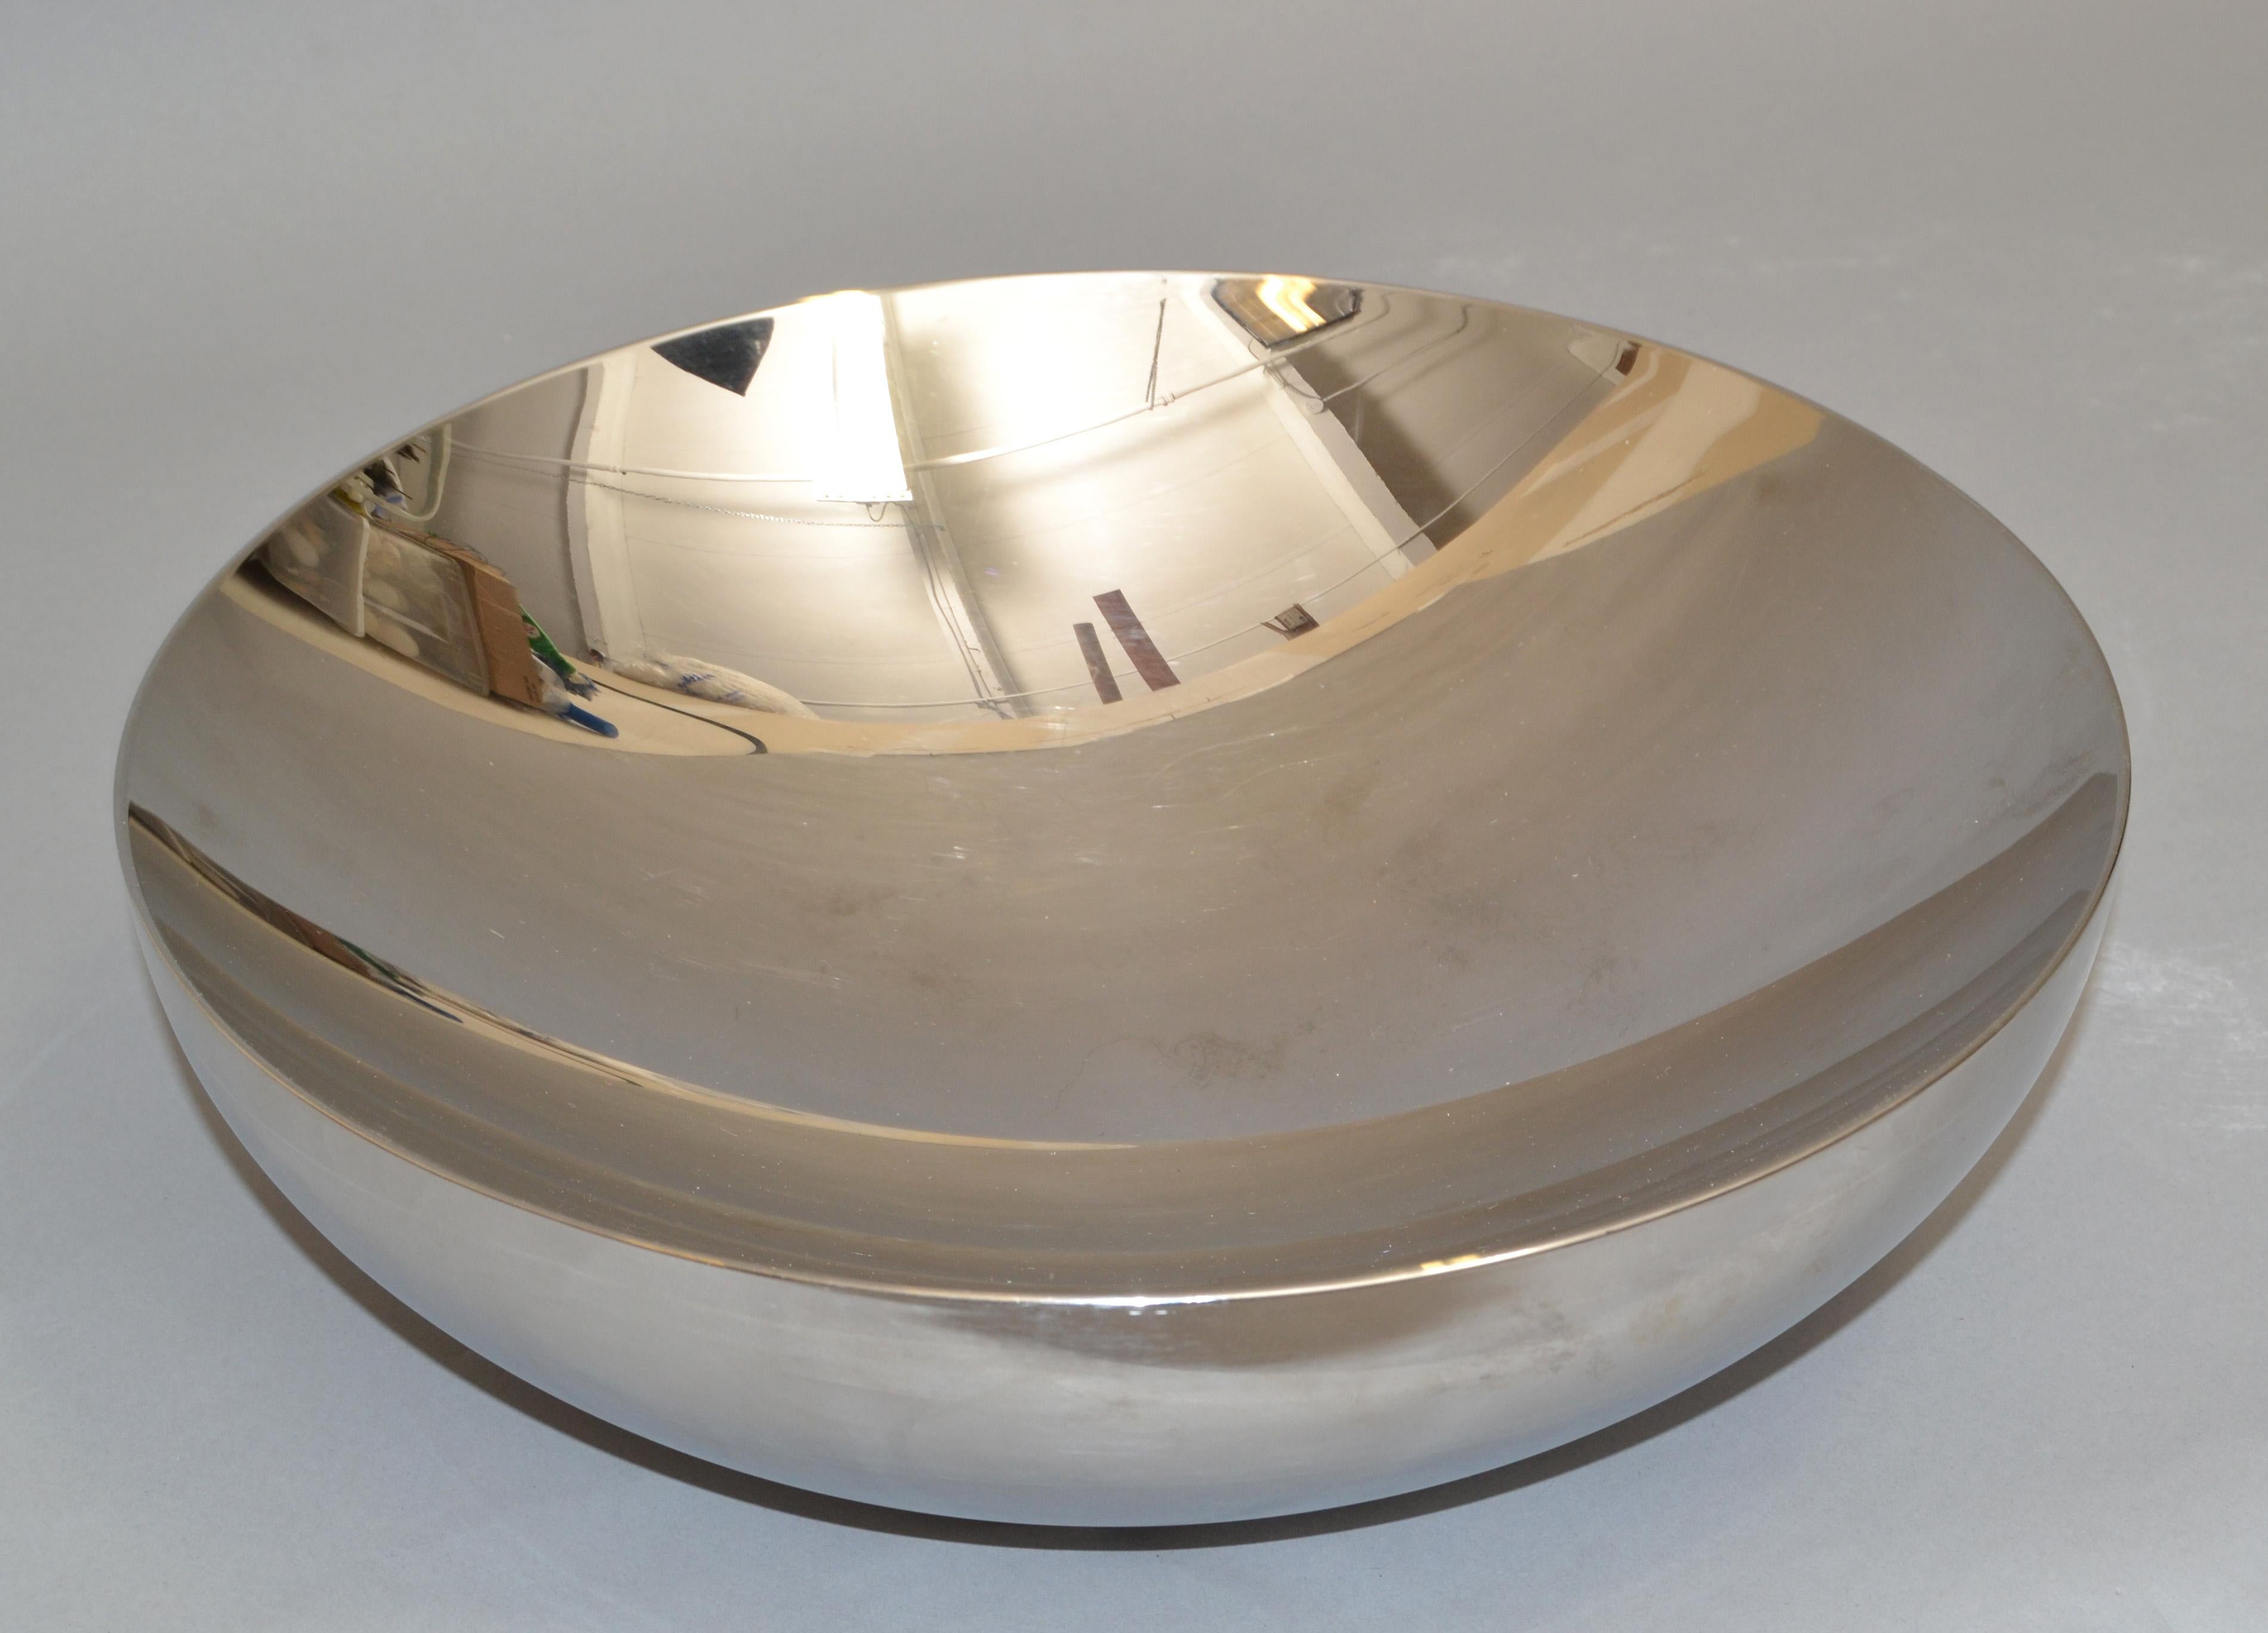 Alessi Durbino Lomazzi Inox 18/10 Stainless Steel Double Wall Serving Bowl Italy In Good Condition For Sale In Miami, FL